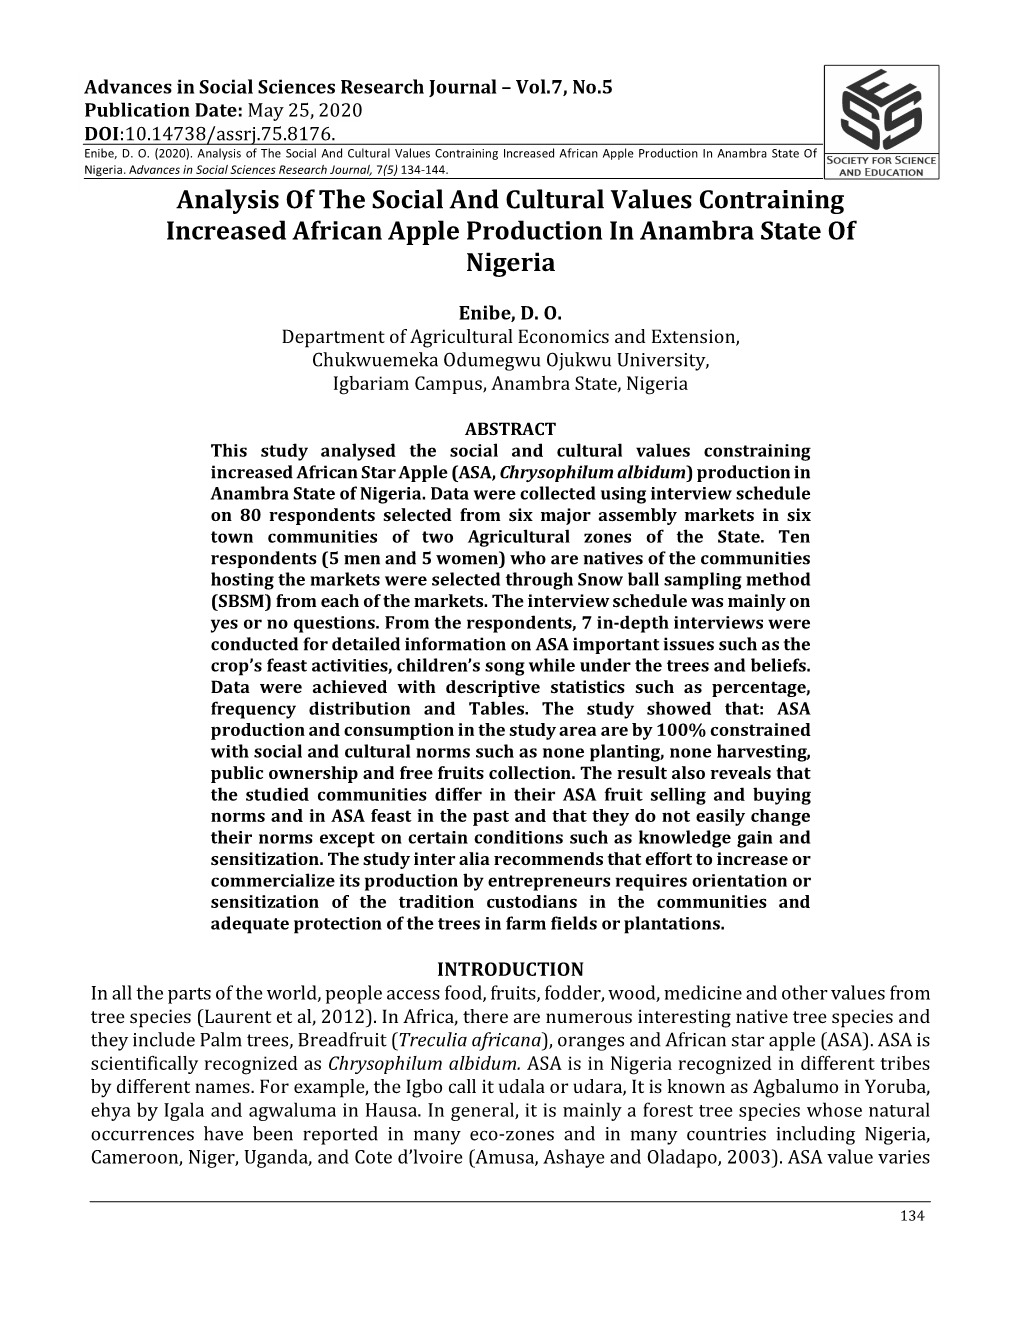 Analysis of the Social and Cultural Values Contraining Increased African Apple Production in Anambra State of Nigeri A